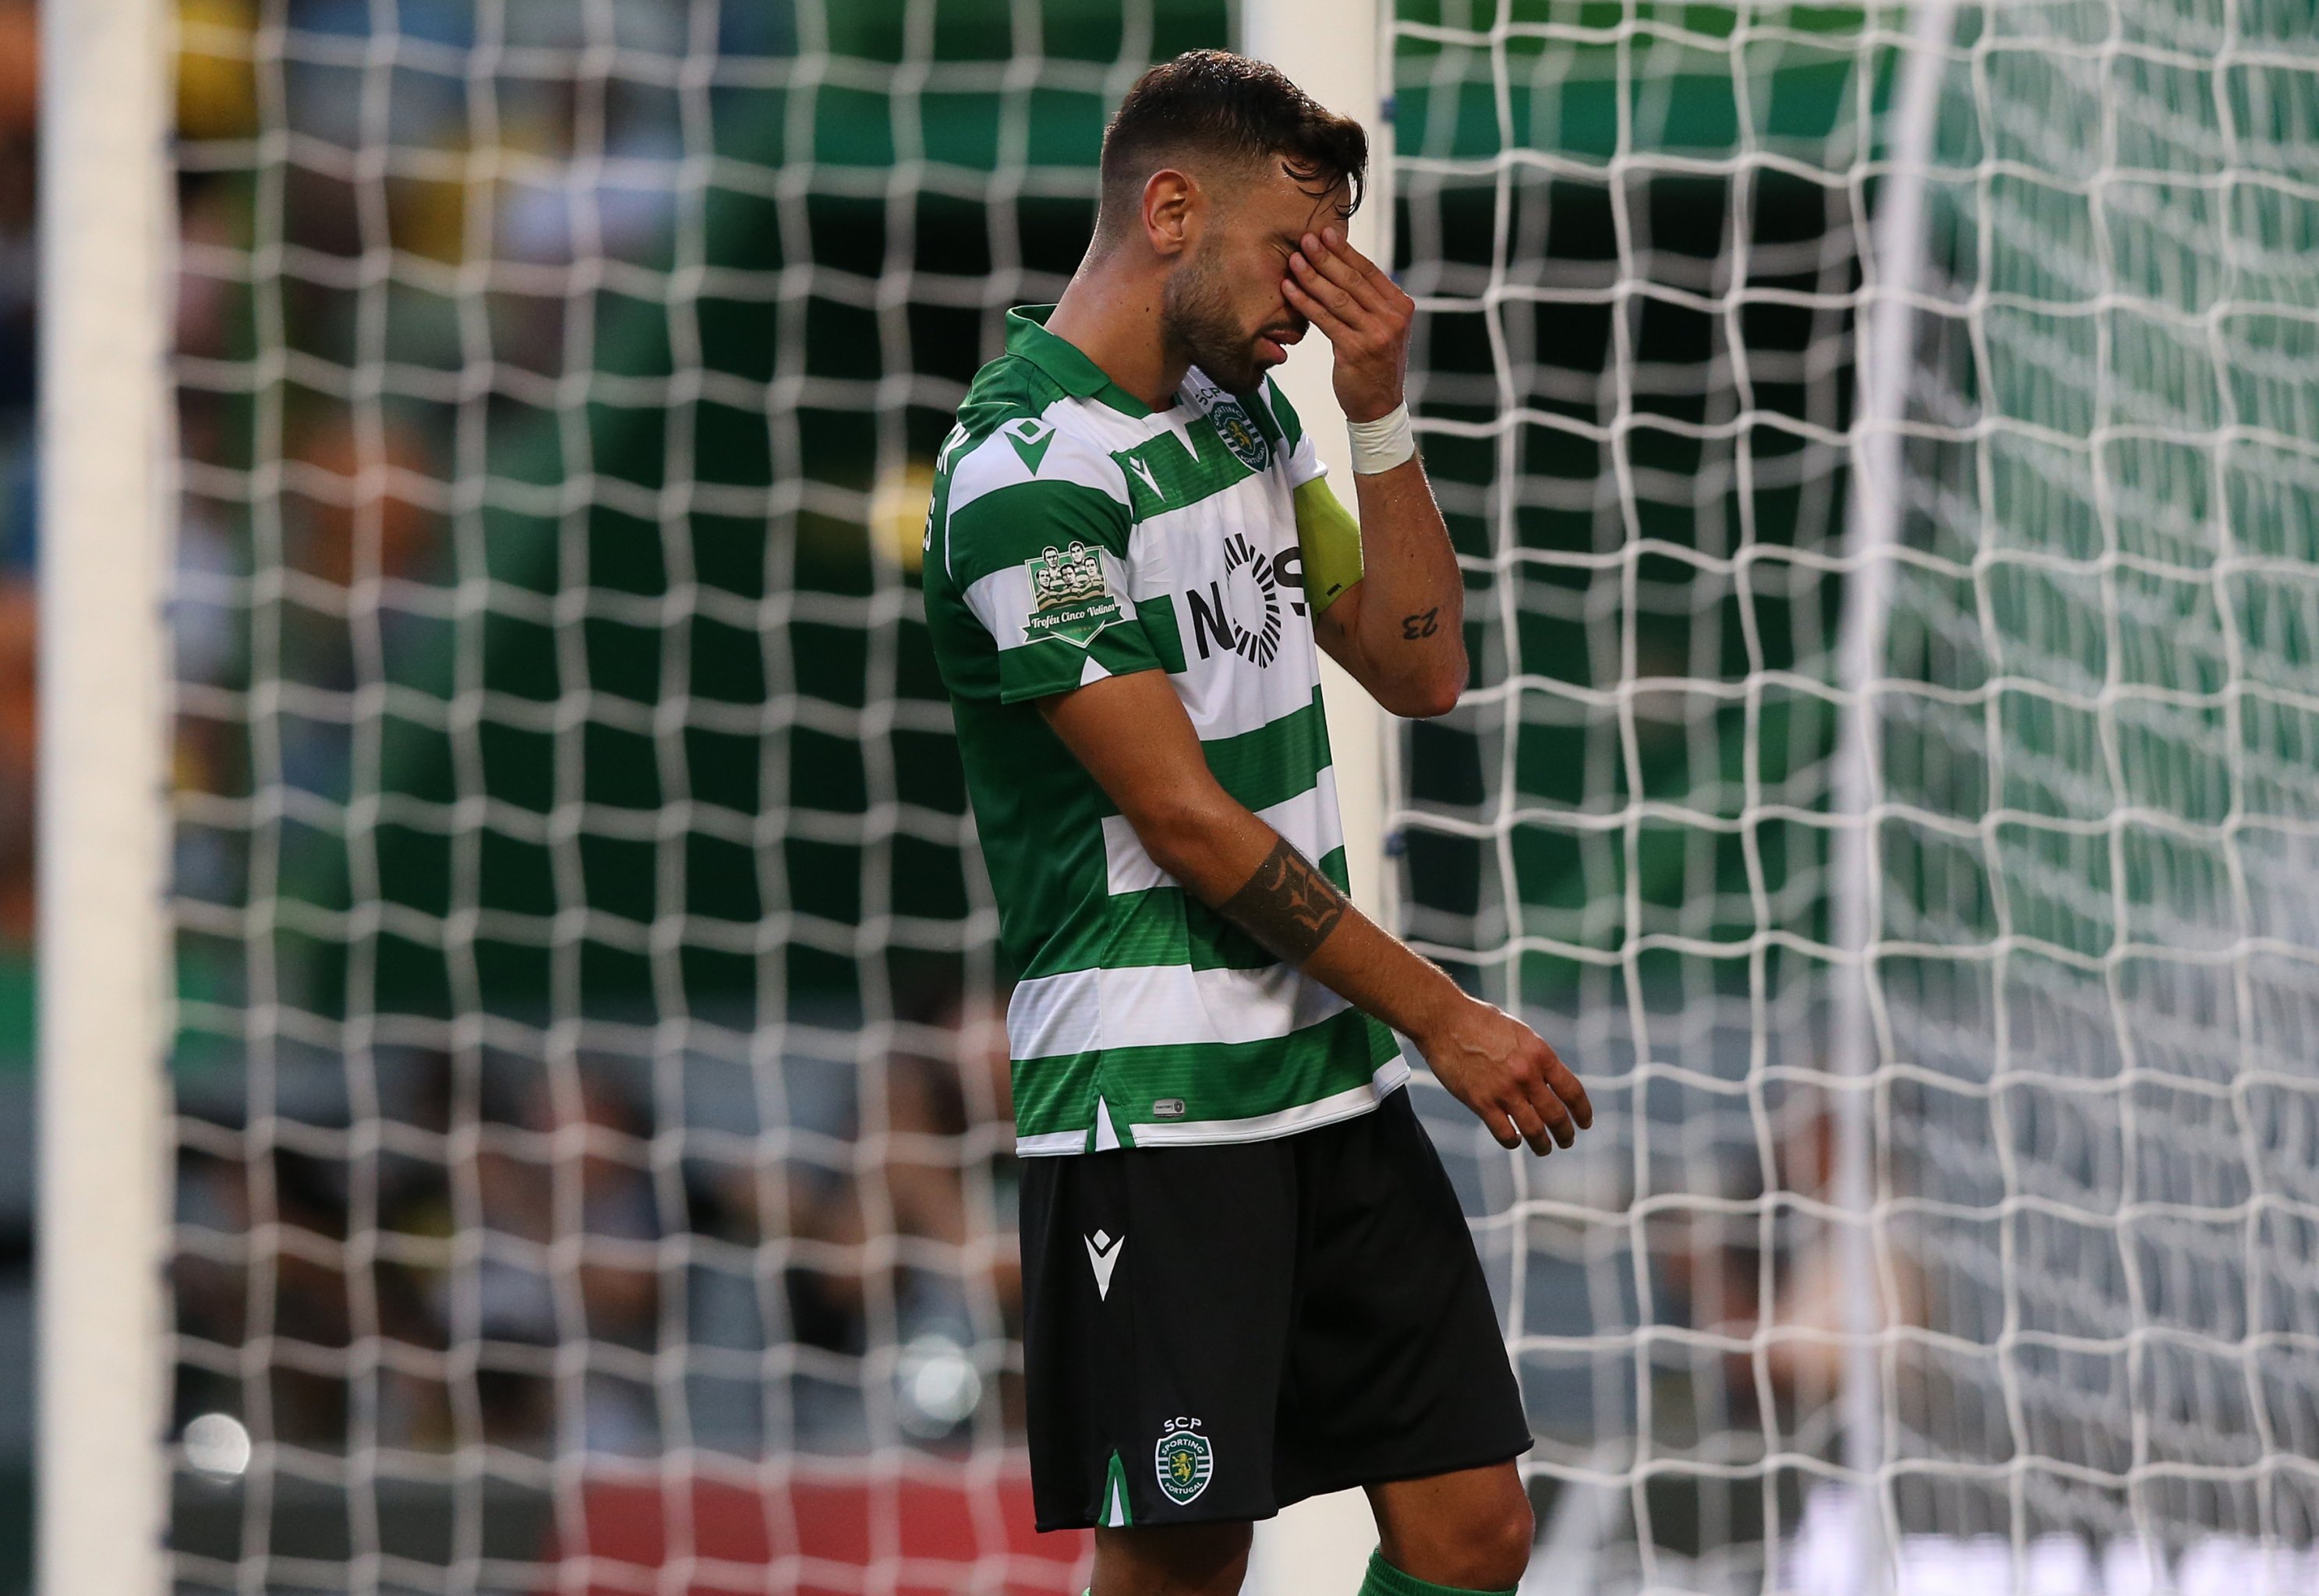 Marcel Keizer Unsure Of Bruno Fernandes Future Amid Manchester United Rumours Bleacher Report Latest News Videos And Highlights